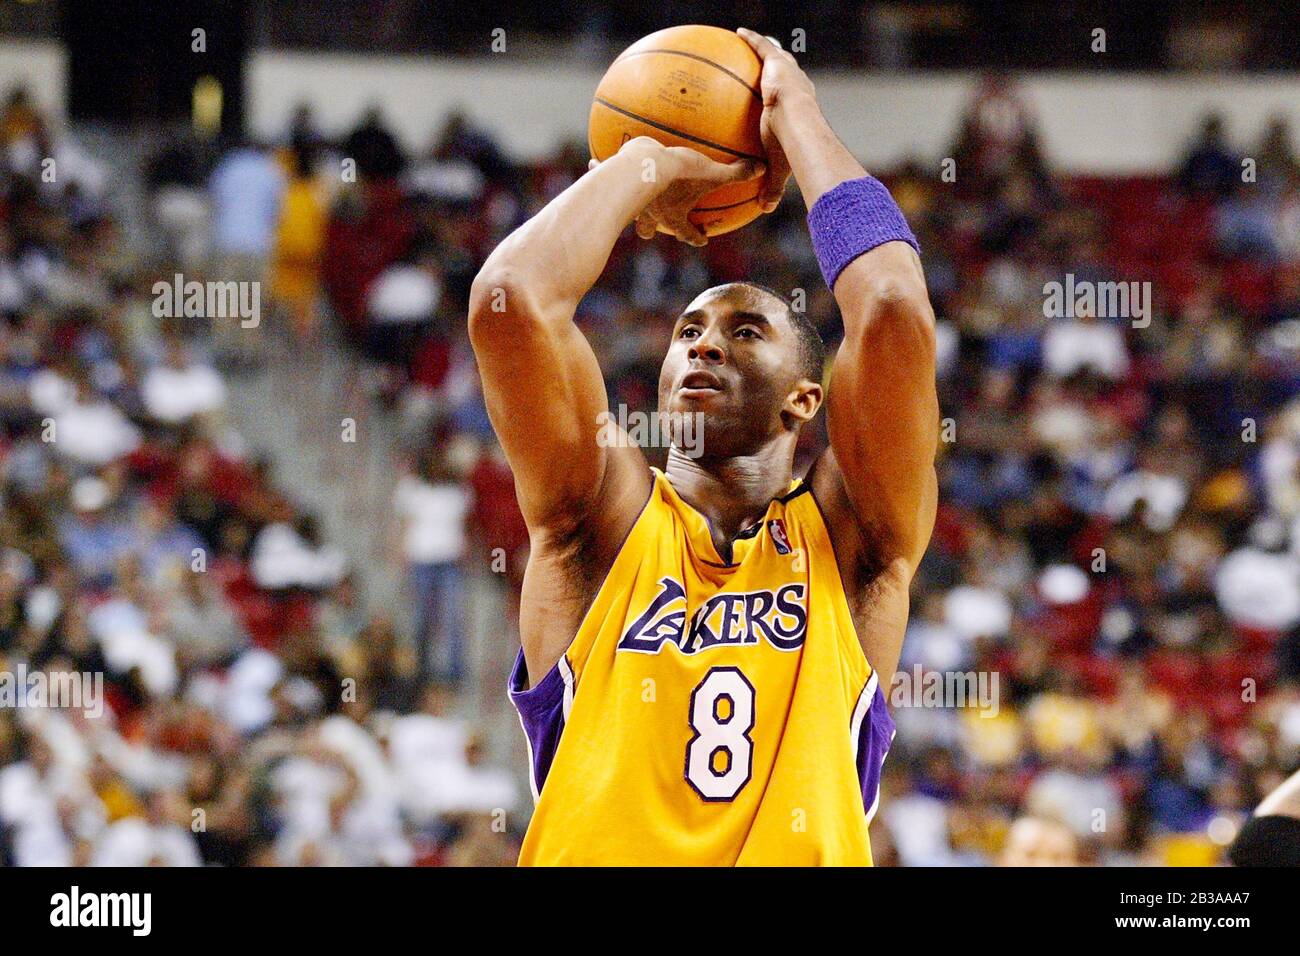 Basketball player Kobe Bryant of the LA Lakers plays in a game against the Phoenix Suns. Stock Photo